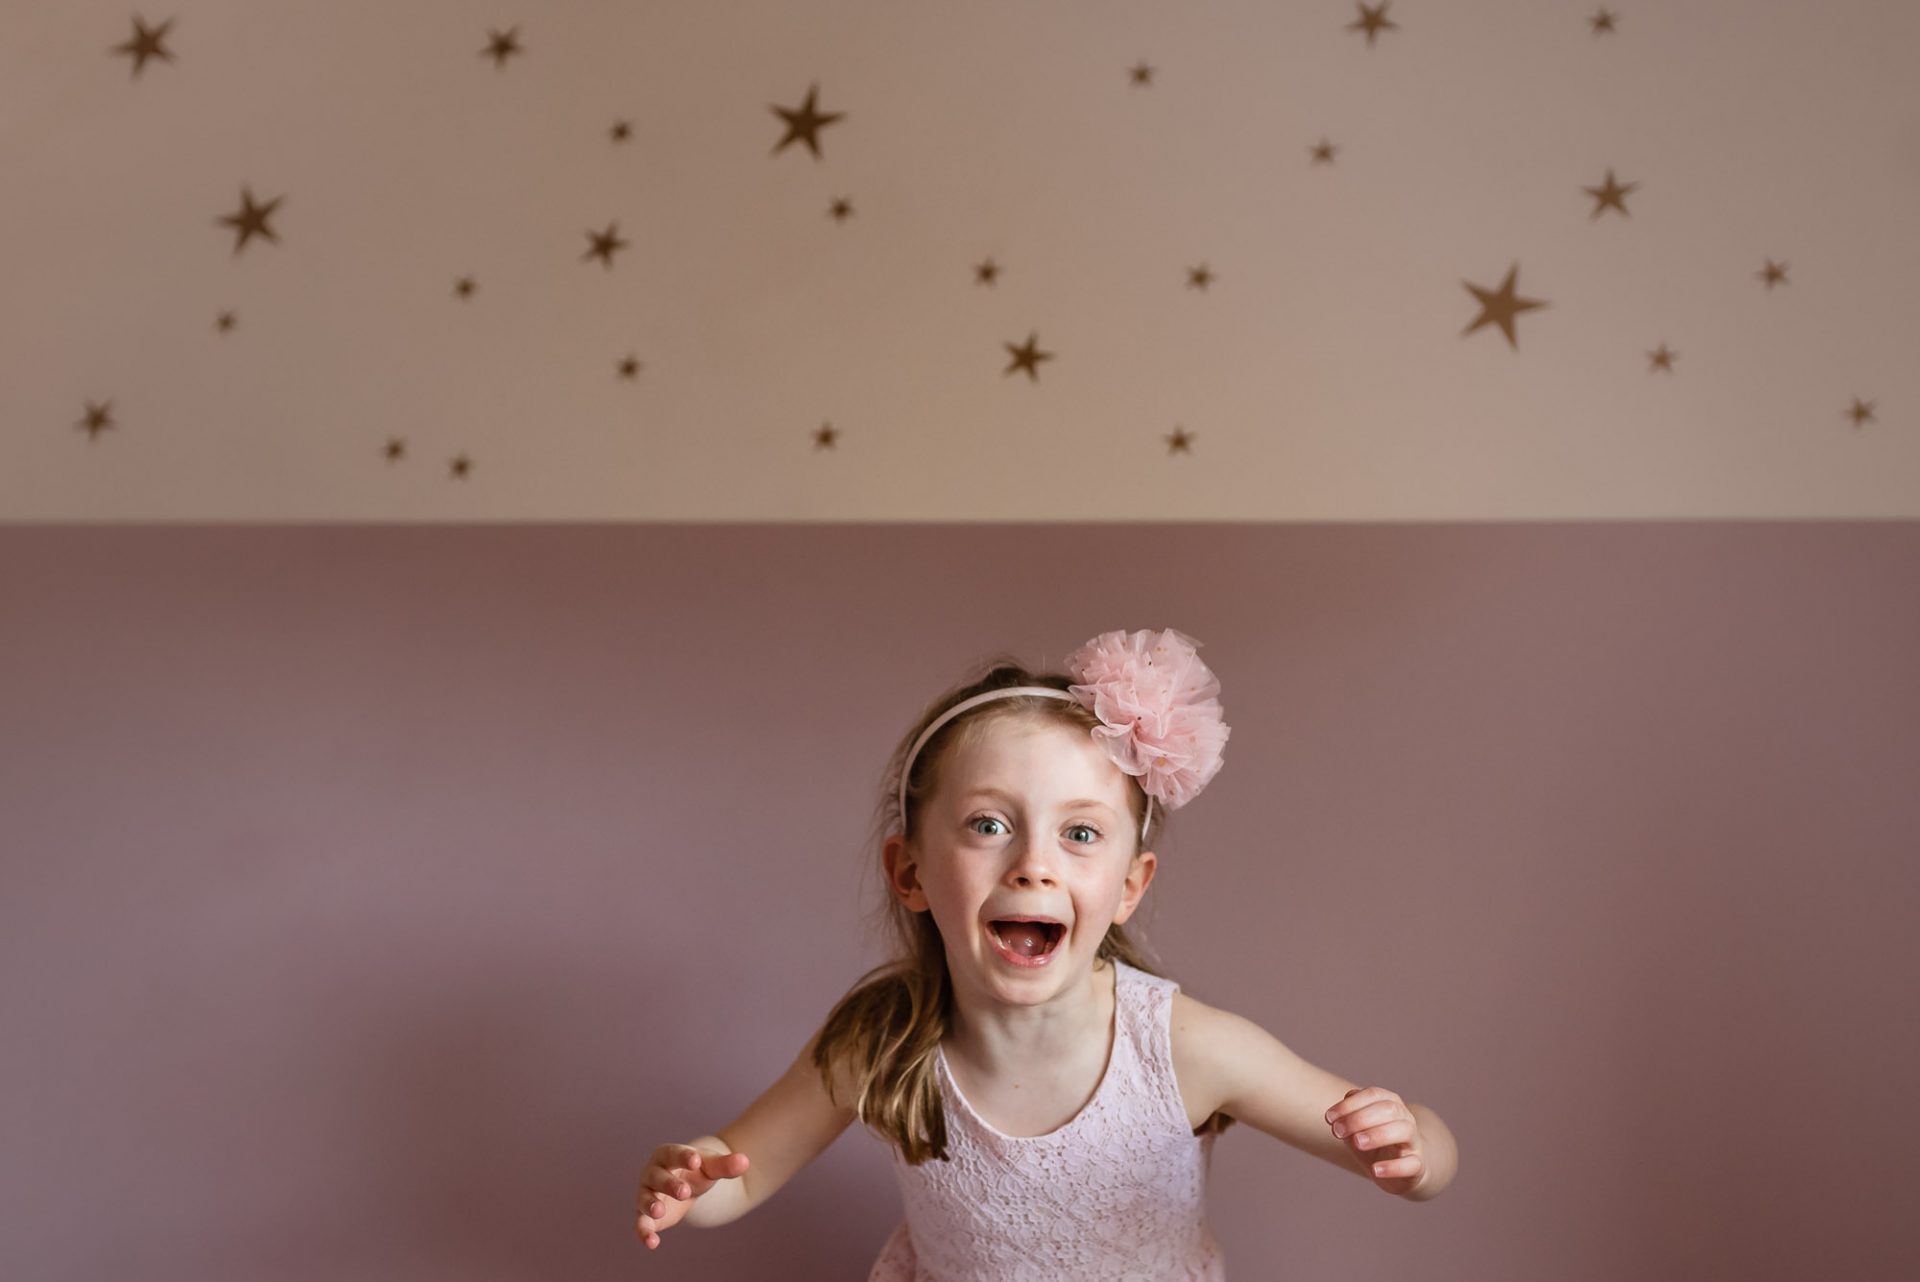 Top tips for taking better photos of your kids indoors